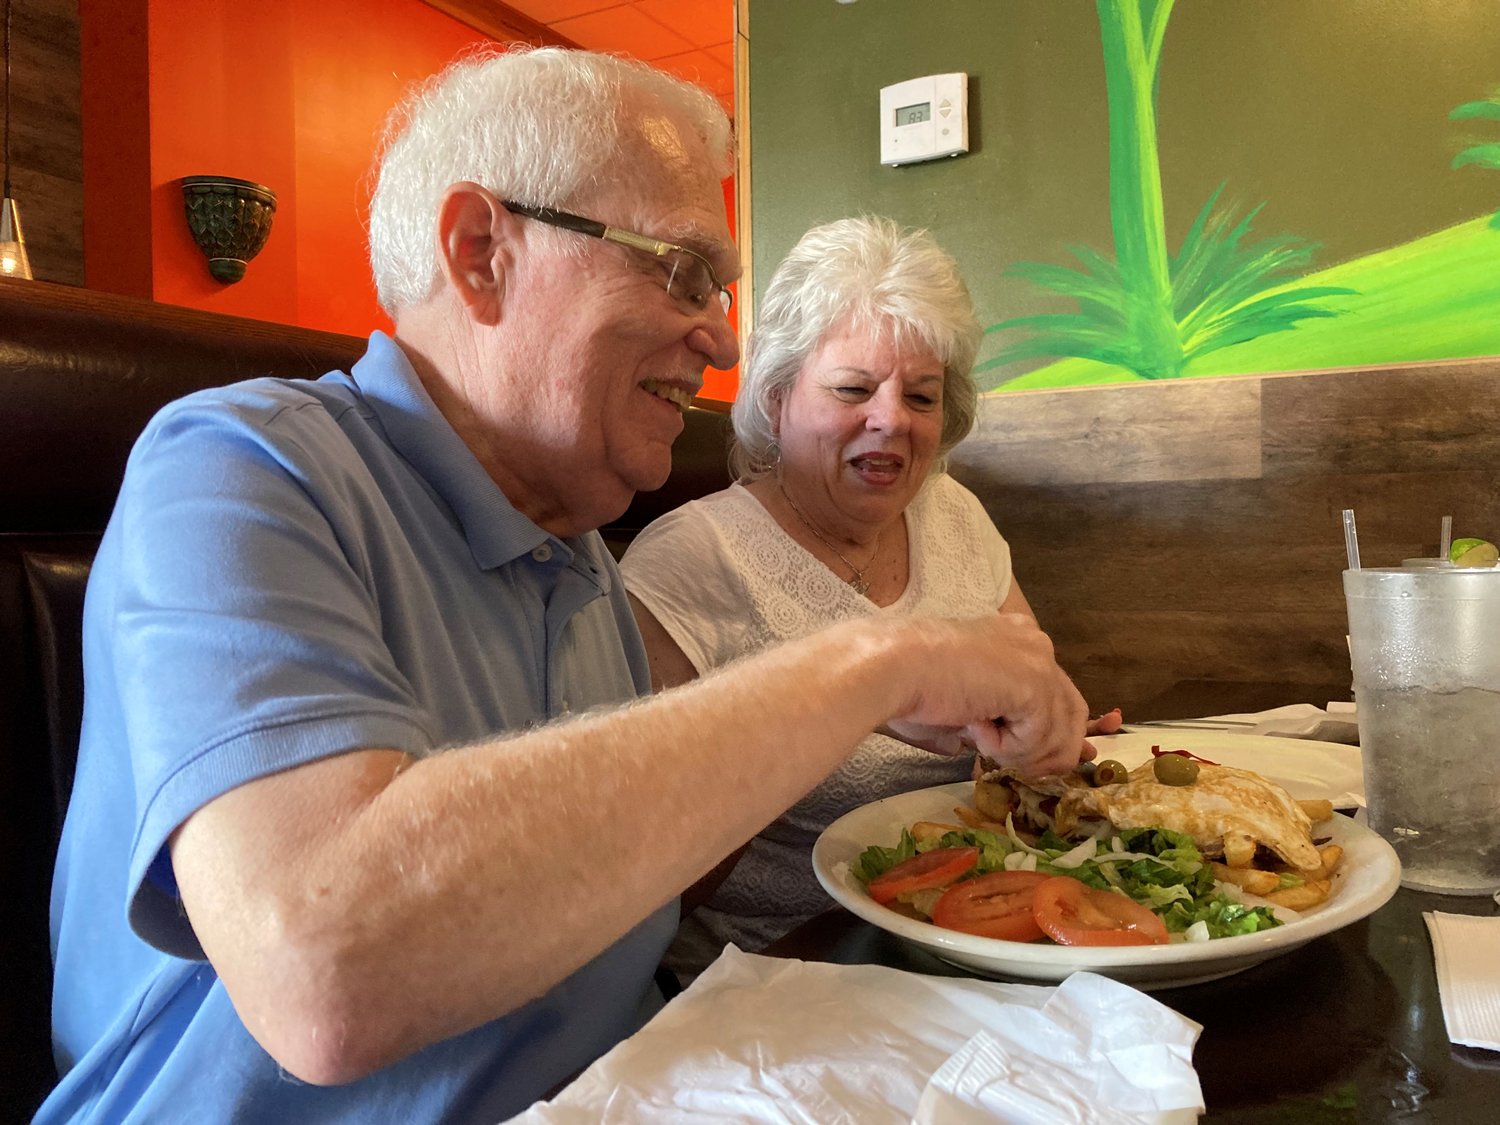 Former international missionaries to Uruguay enjoy chivito al plato at Sabor Latino restaurant in Athens, Ga. The Florida couple were in Athens for a reunion with other retired missionaies. (Christian Index/Roger Alford)